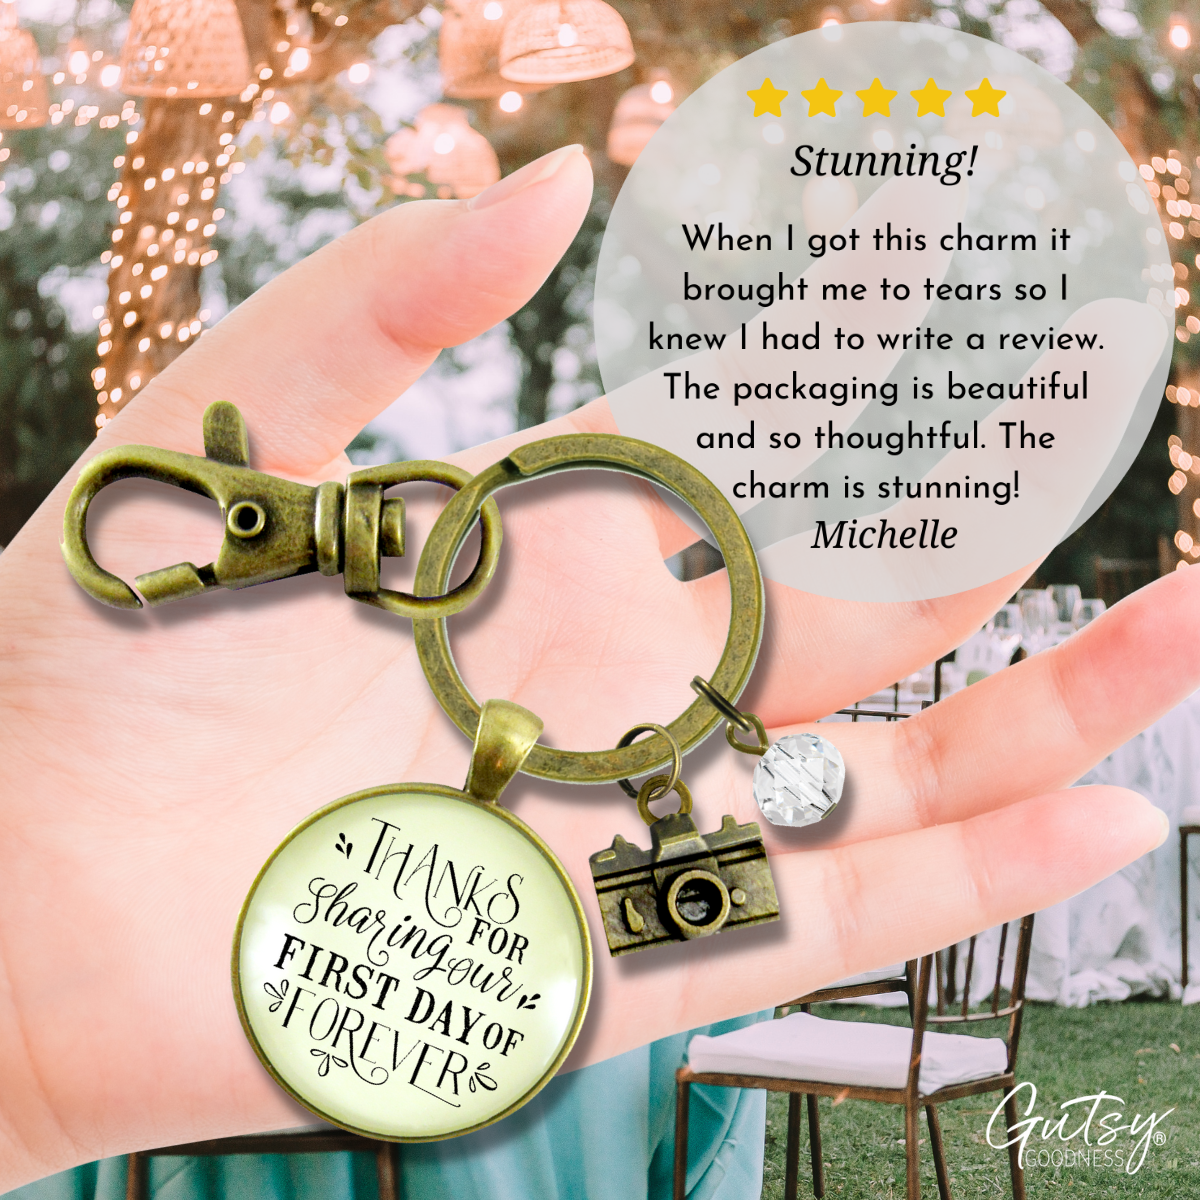 Wedding Photographer Gift Keychain Thanks For Sharing Our Day Rustic Camera Charm - Gutsy Goodness